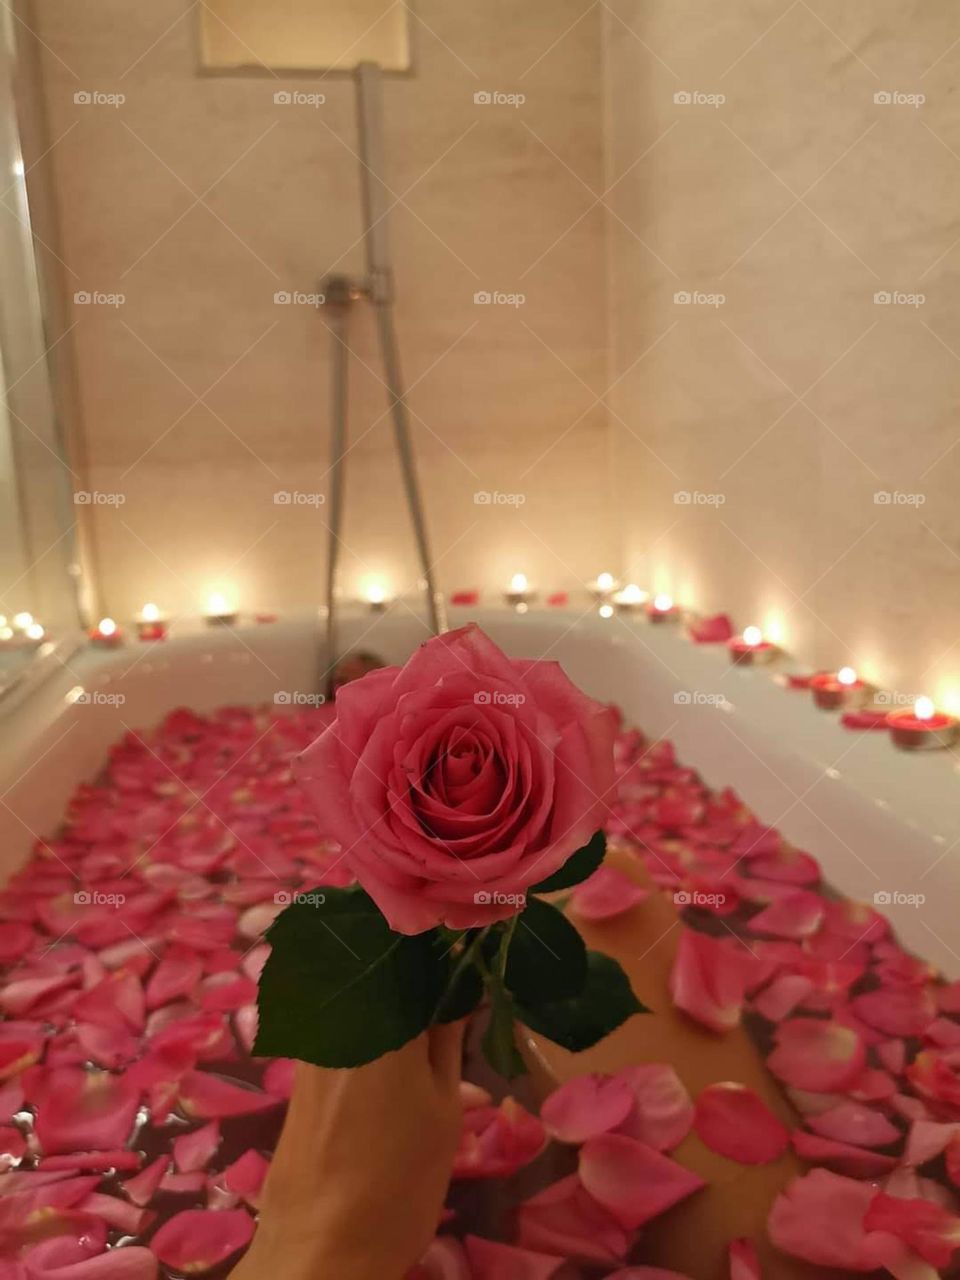 Bathroom. Rose petals in a bath. Woman relax and enjoy moments in a bath with roses petals. My favorite place in the house is bathroom...